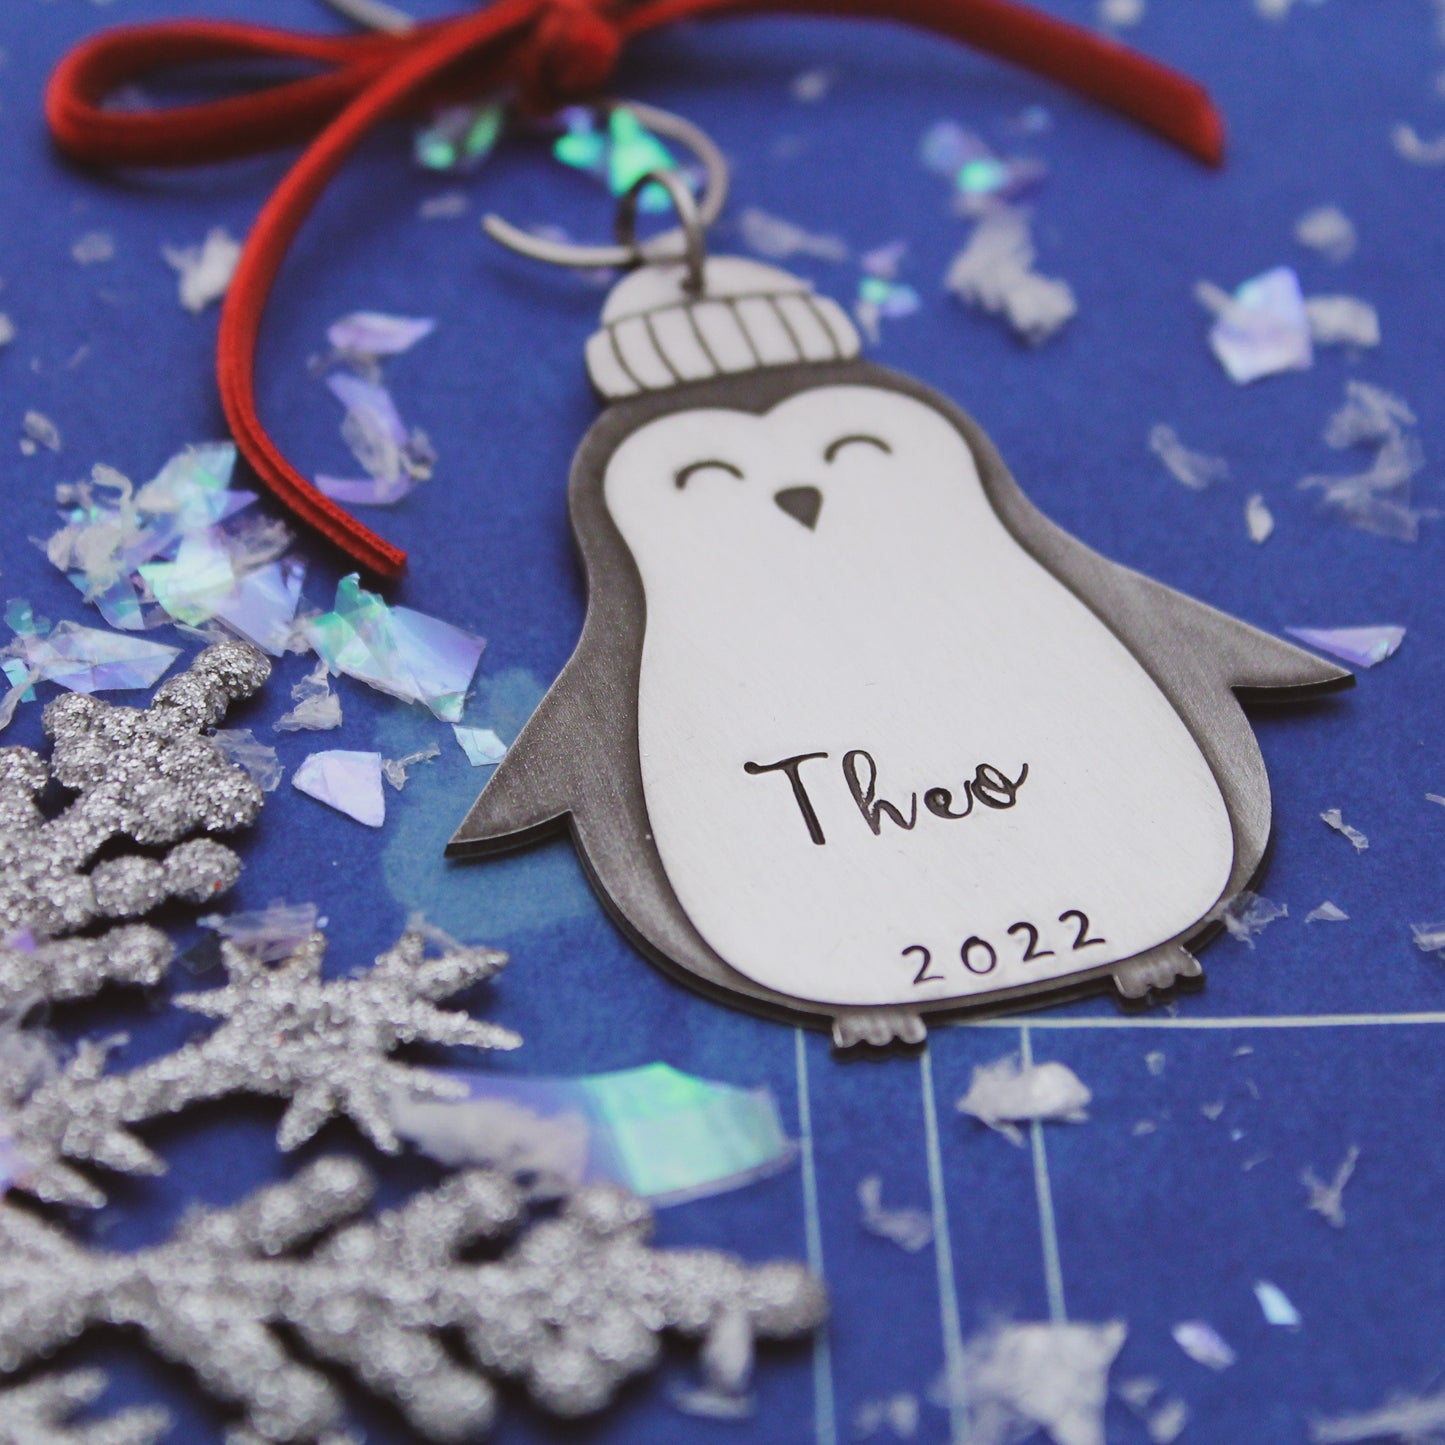 Penguin Christmas Ornament, Personalized Name Christmas Ornament, Custom Penguin Ornament, Cute Penguin Ornament, Hand Stamped in Aluminum